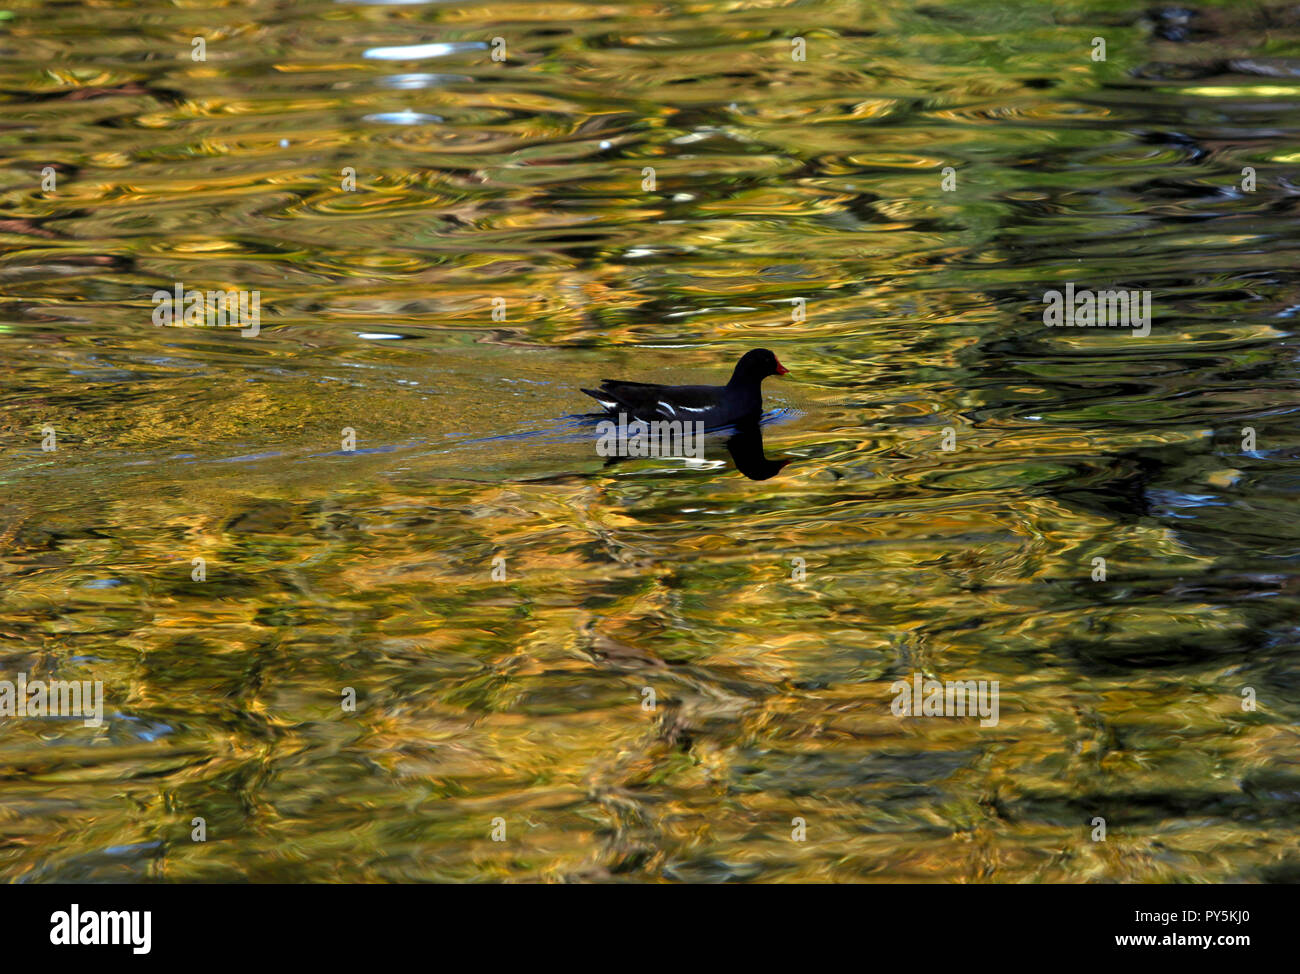 London, Britain. October 25, 2018. Autumn colours are reflected in one of the lakes in Regents Park, in central London, Britain. Credit: John Voos, TSL/Alamy Live News Stock Photo